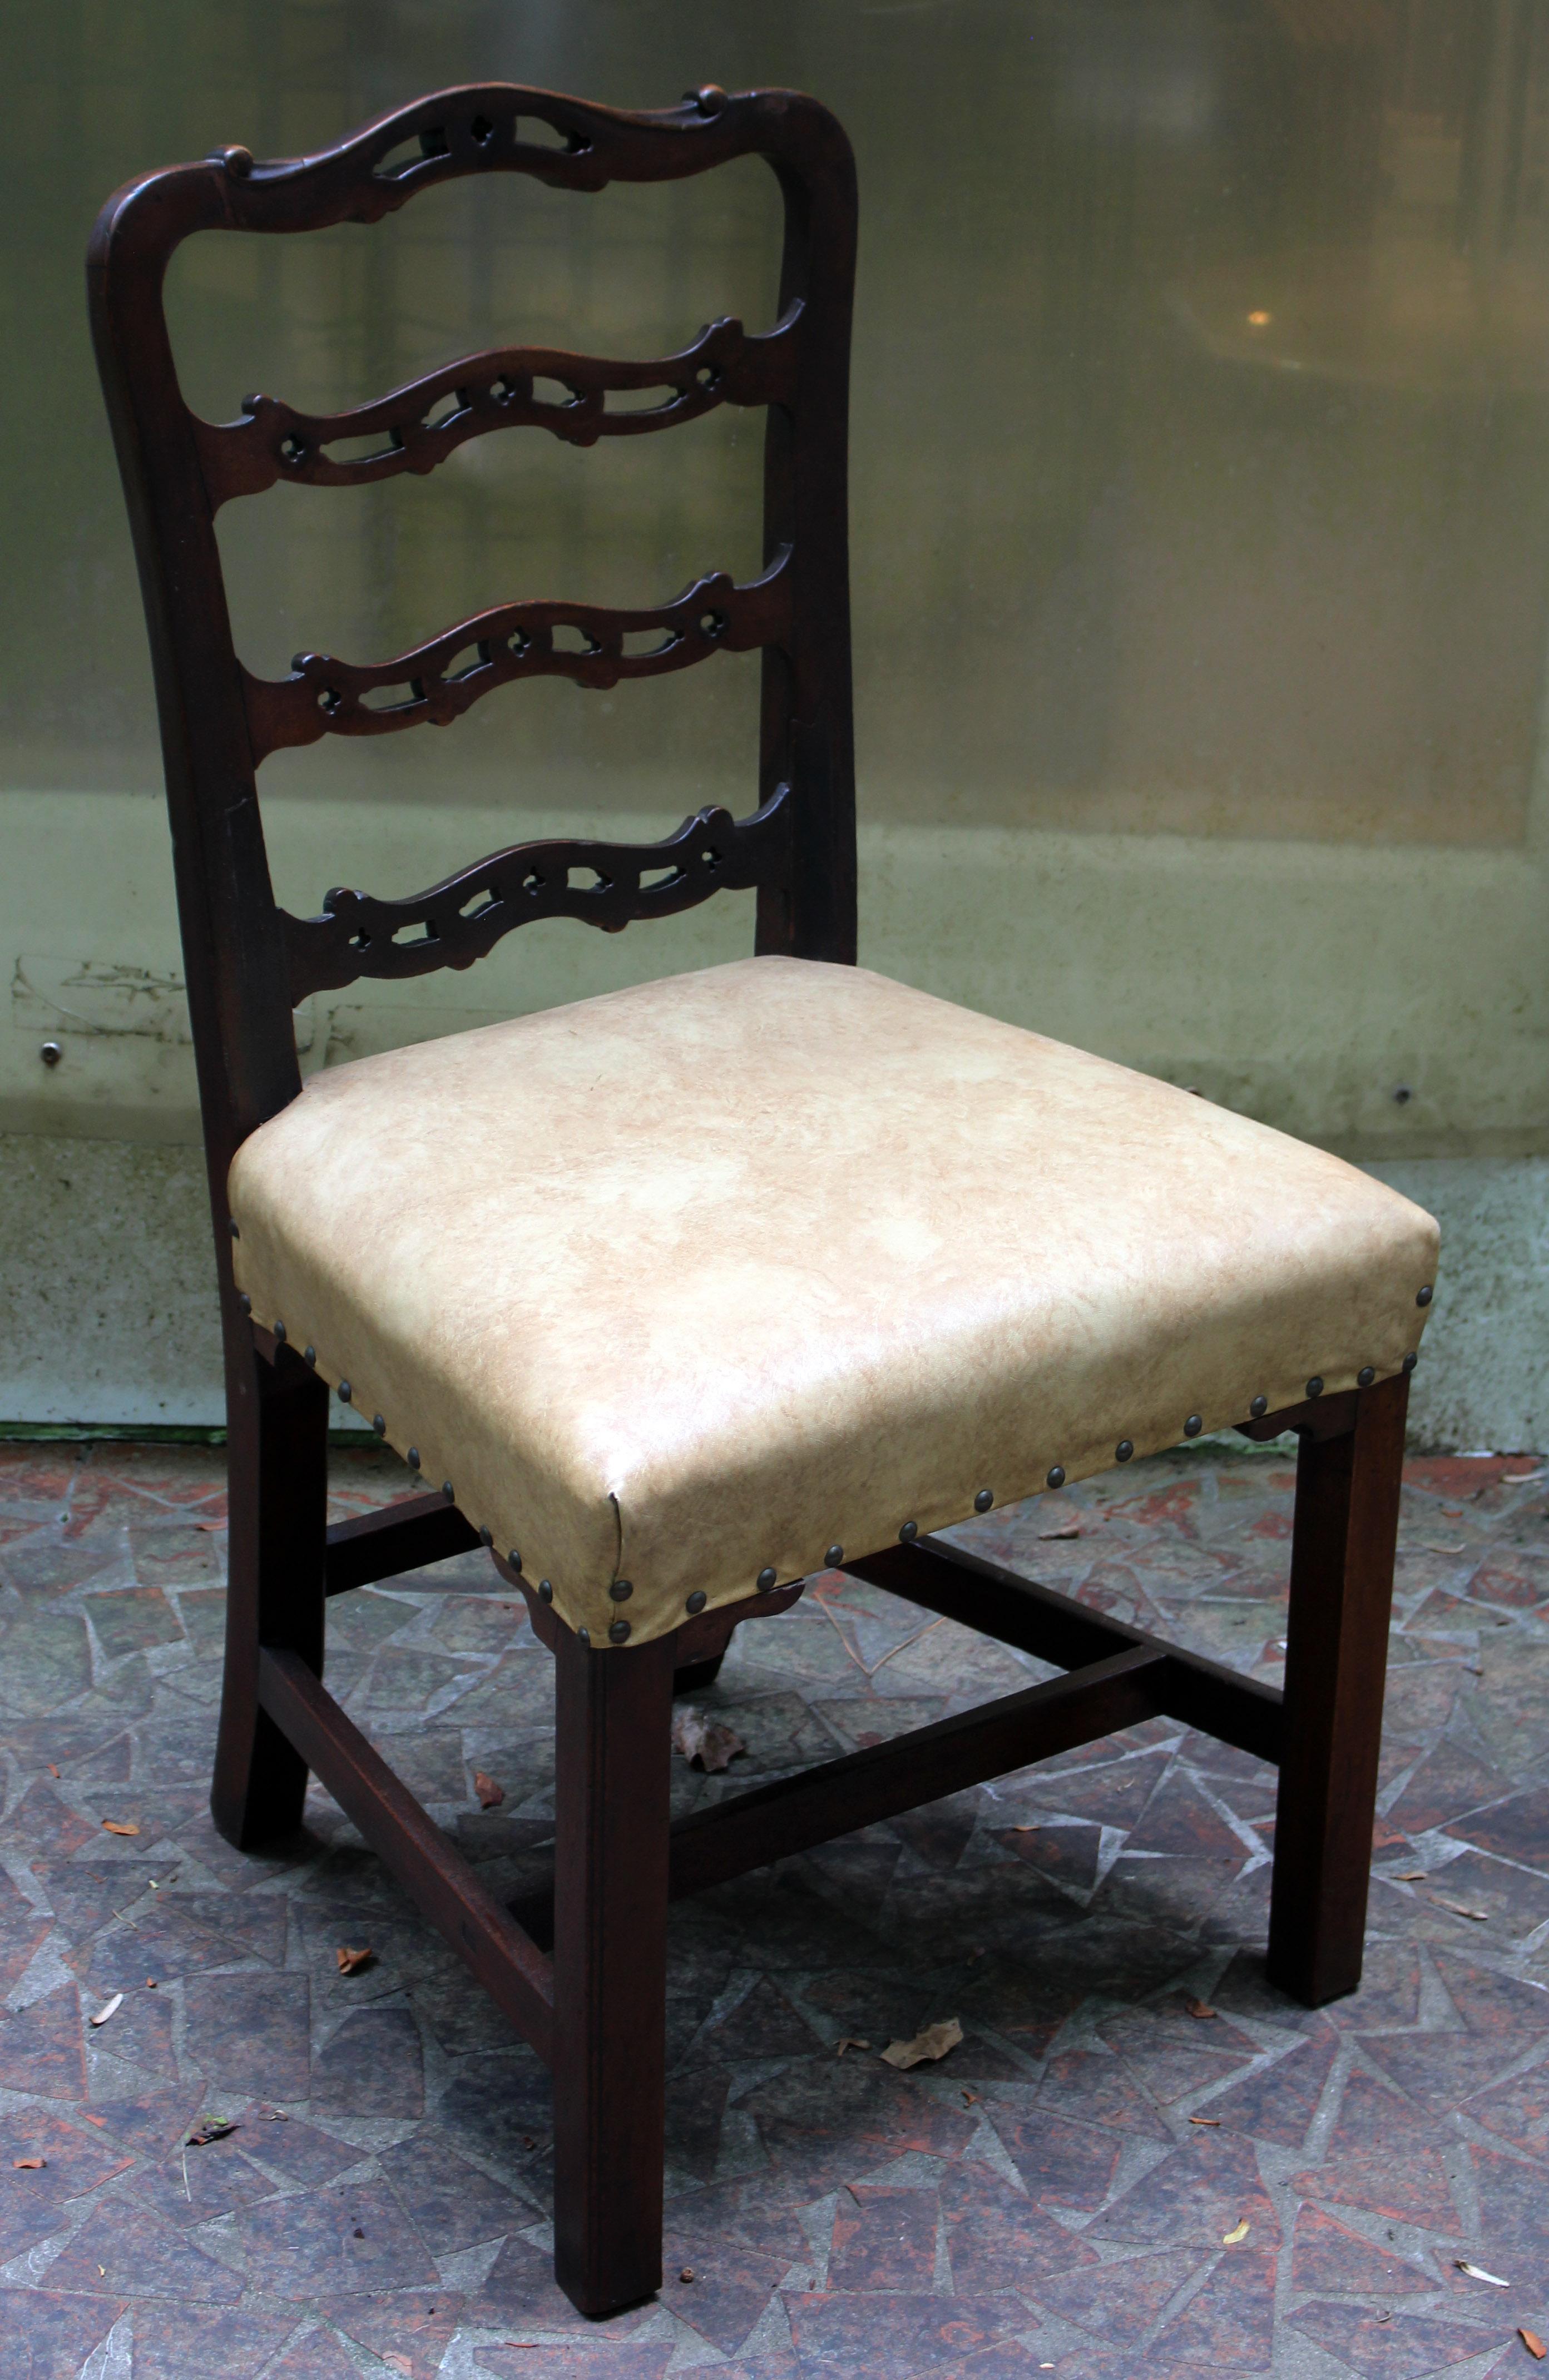 A George III side chair of good, sturdy size. English, c.1760, mahogany. The wavy ladder back with Gothick open cut-work typical of Chippendale design. Stretchered, square molded legs with shaped decorative seat returns. Faux leather upholstery with